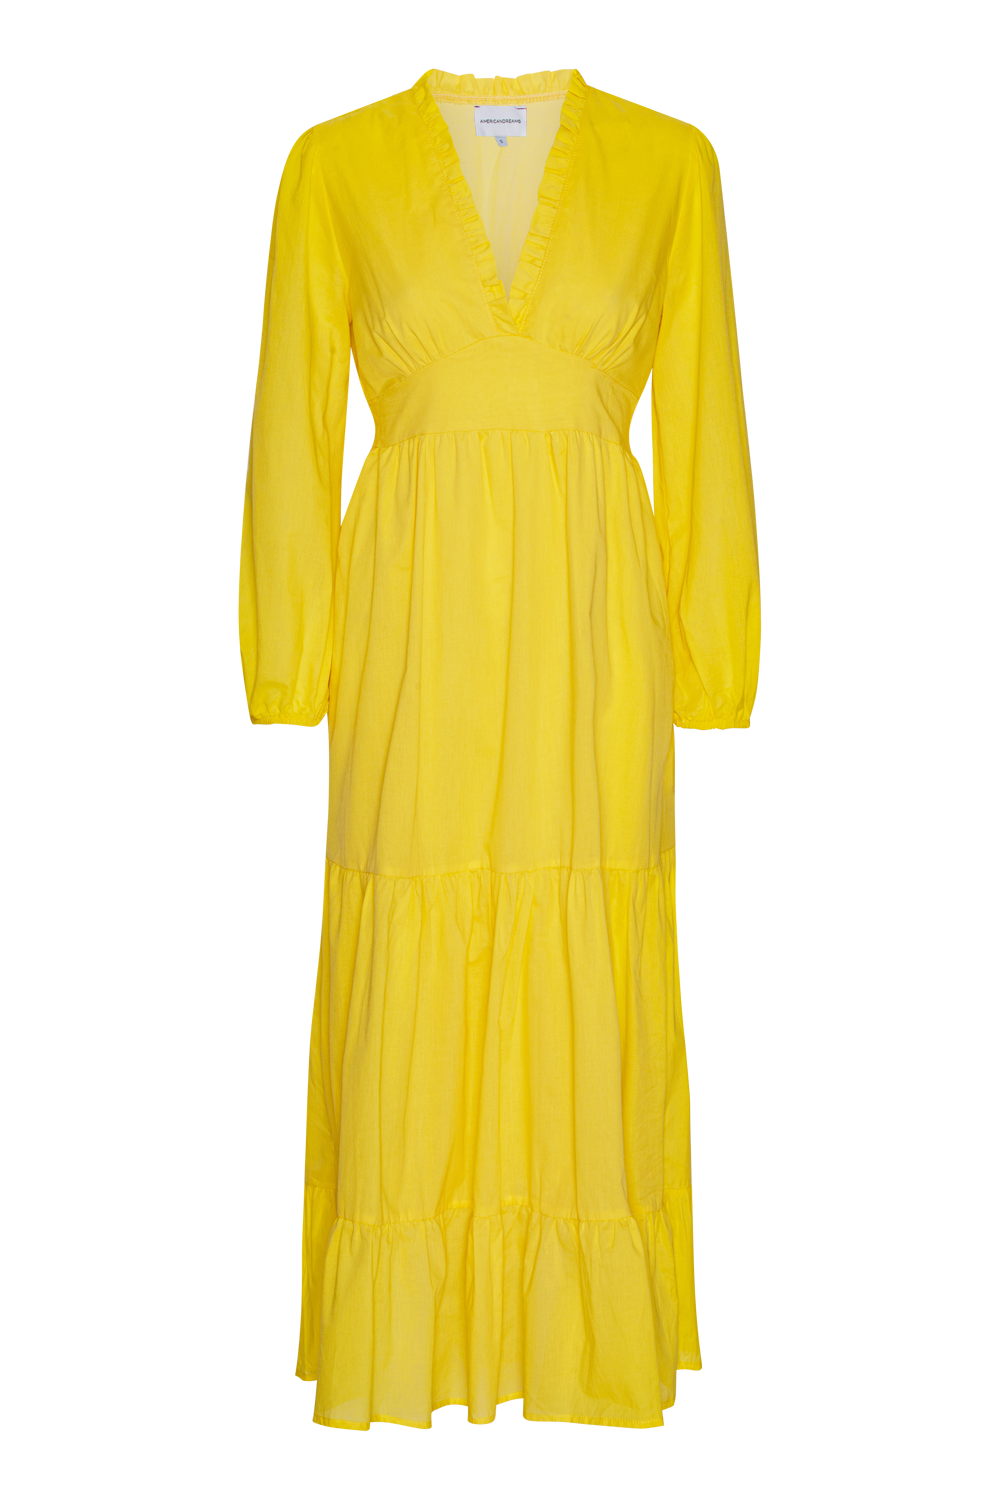 Umi Long Solid Cotton Yellow